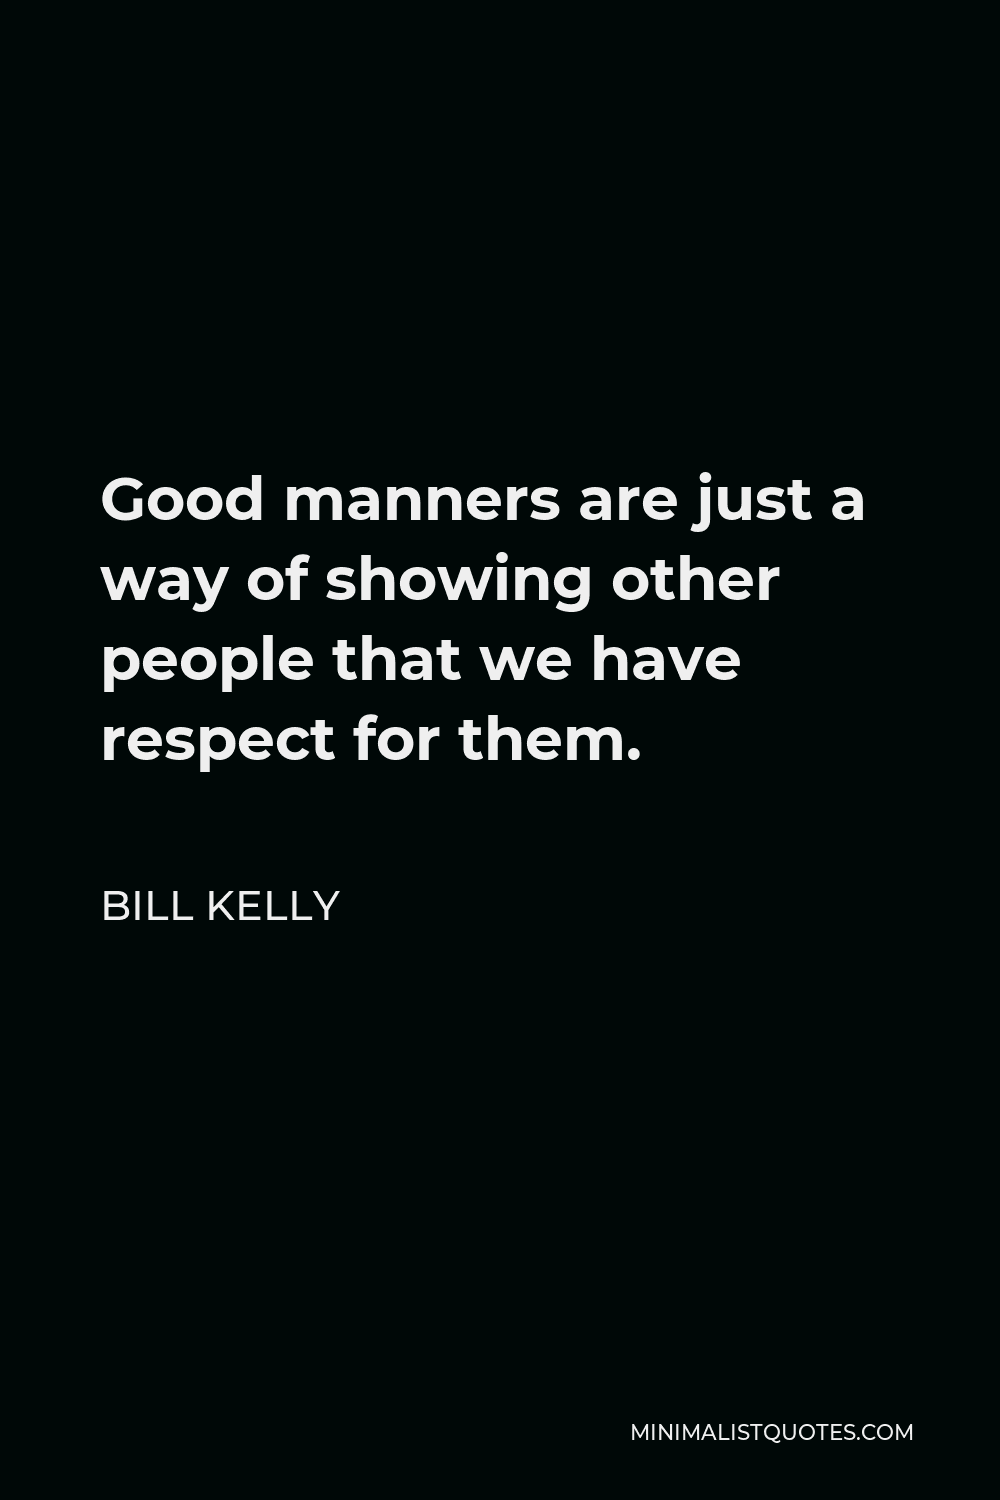 Bill Kelly Quote - Good manners are just a way of showing other people that we have respect for them.